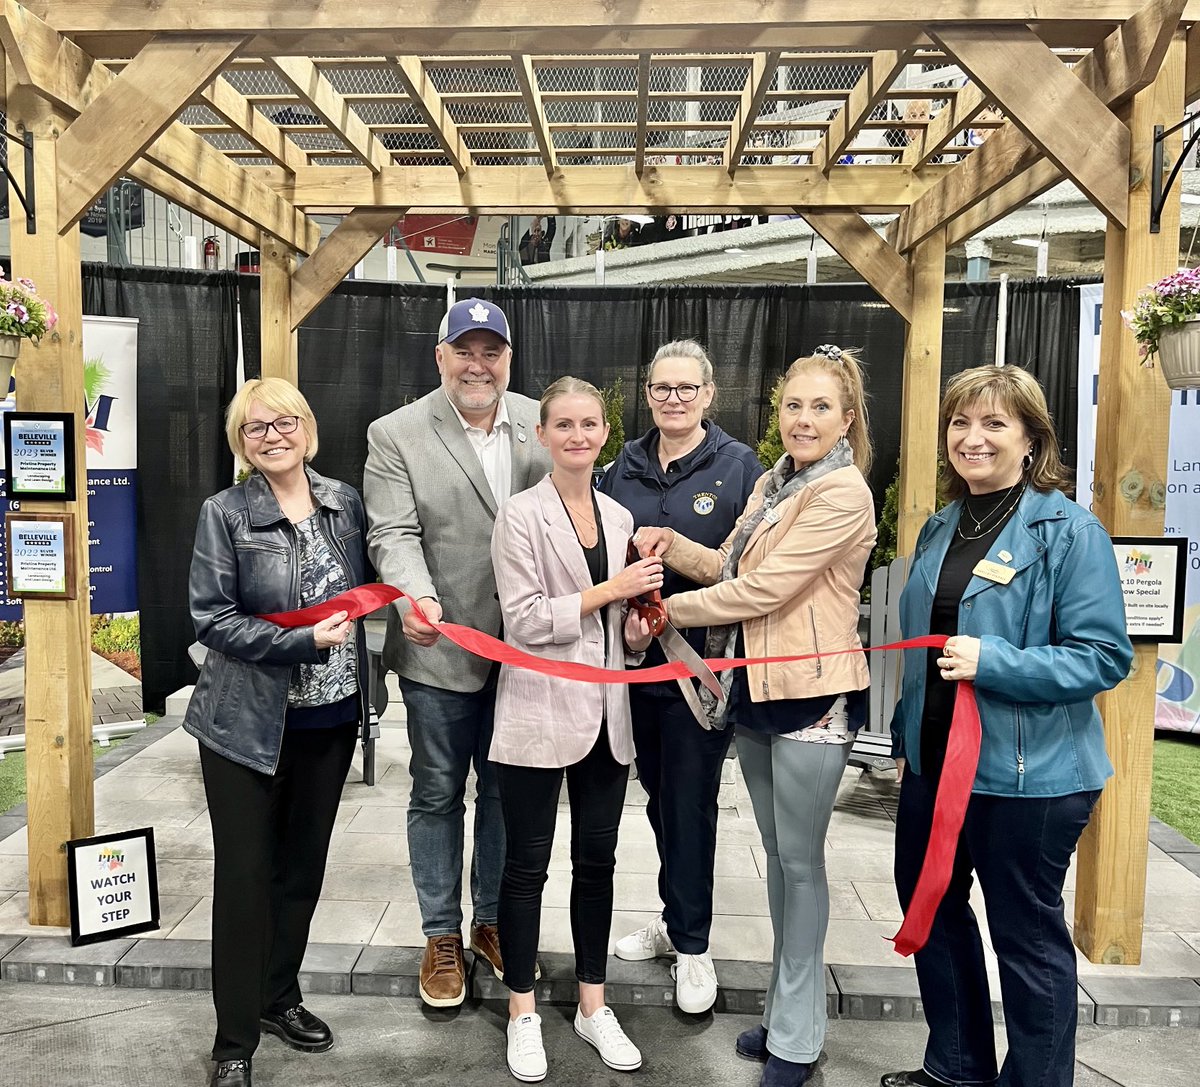 It’s OPEN all weekend!! 🏡🏘️🏠 Make sure to stop by the #BayofQuinte Home Show at the Dunc MacDonald Arena in Trenton. ⁦@quintewest⁩ ⁦@QWChamber⁩